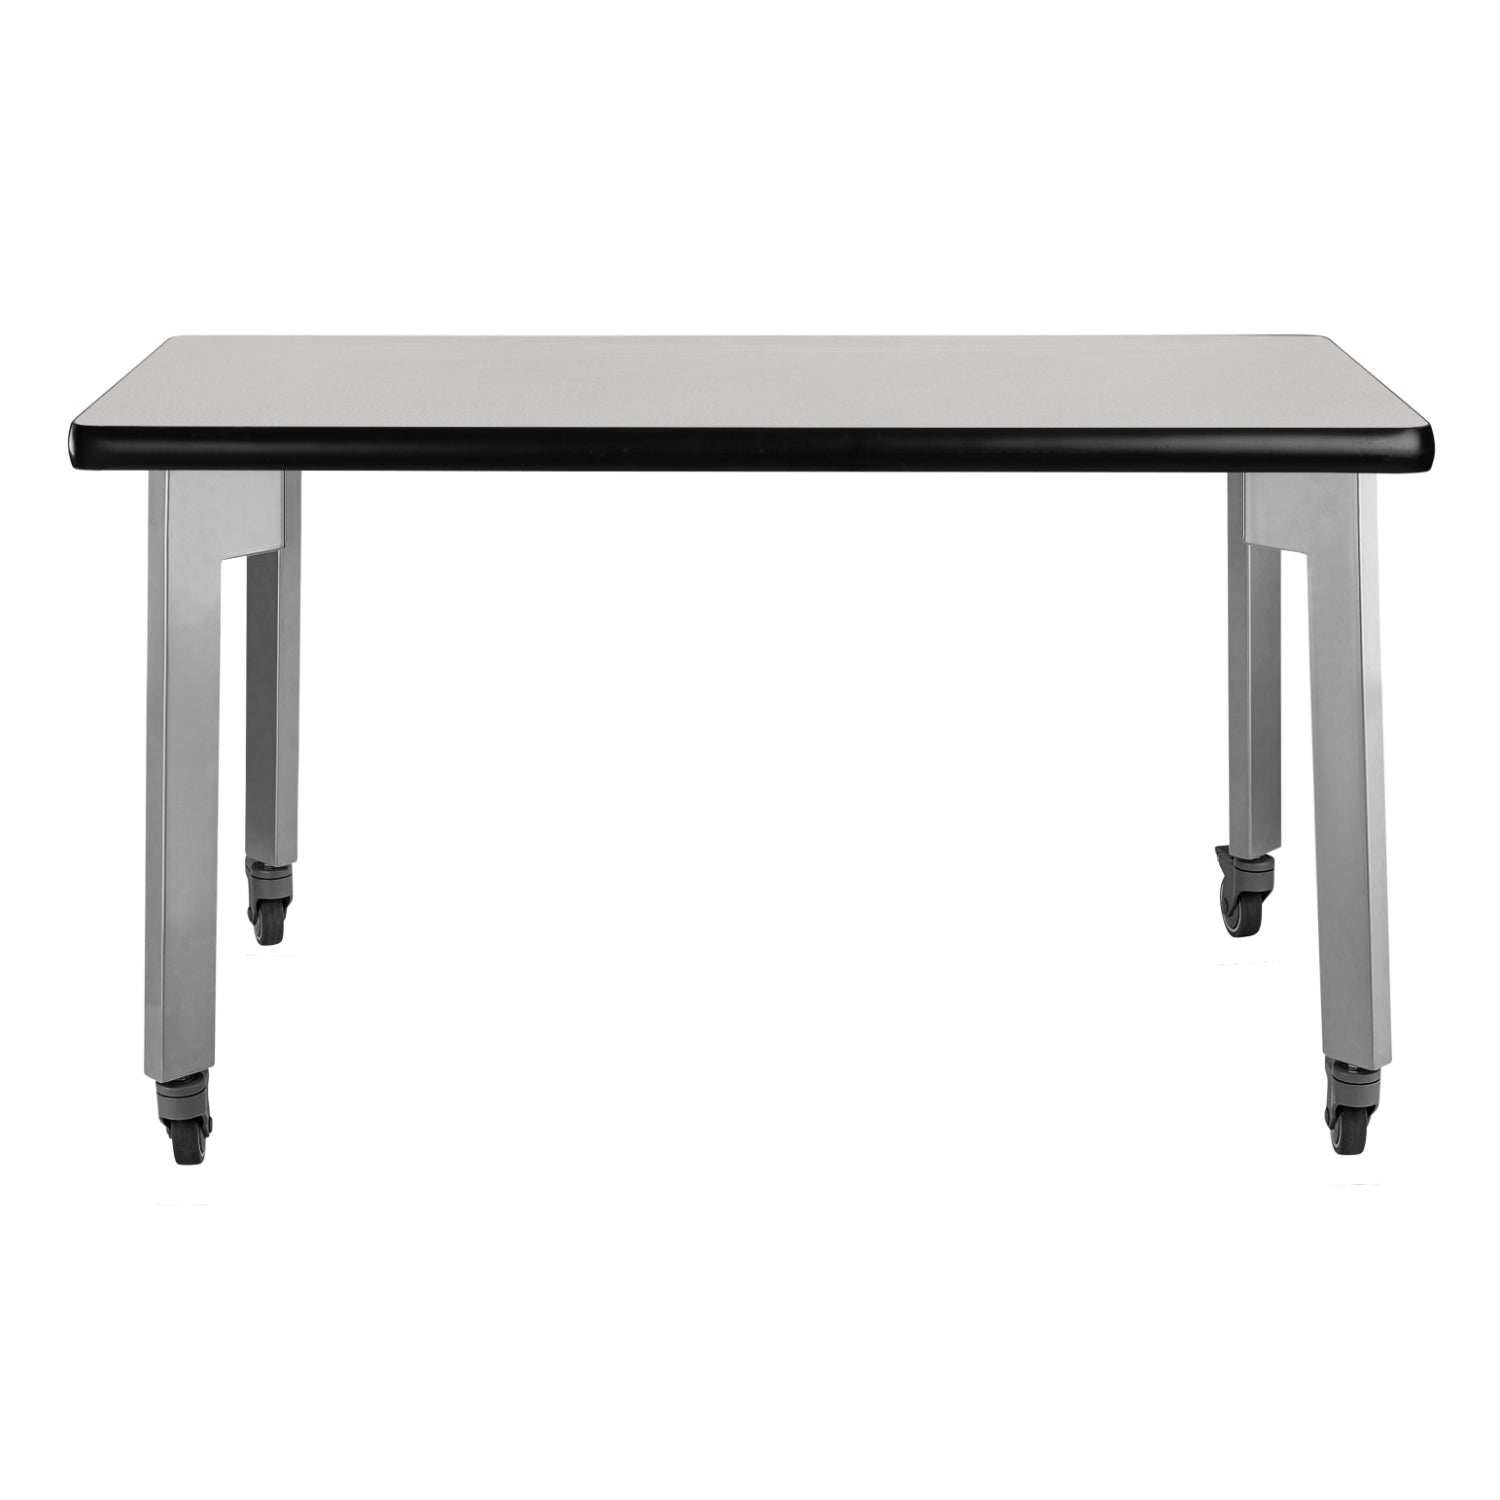 Titan Mobile Table, 30" x 72", Standard High Pressure Laminate Top with Particleboard Core and T-Mold Edge